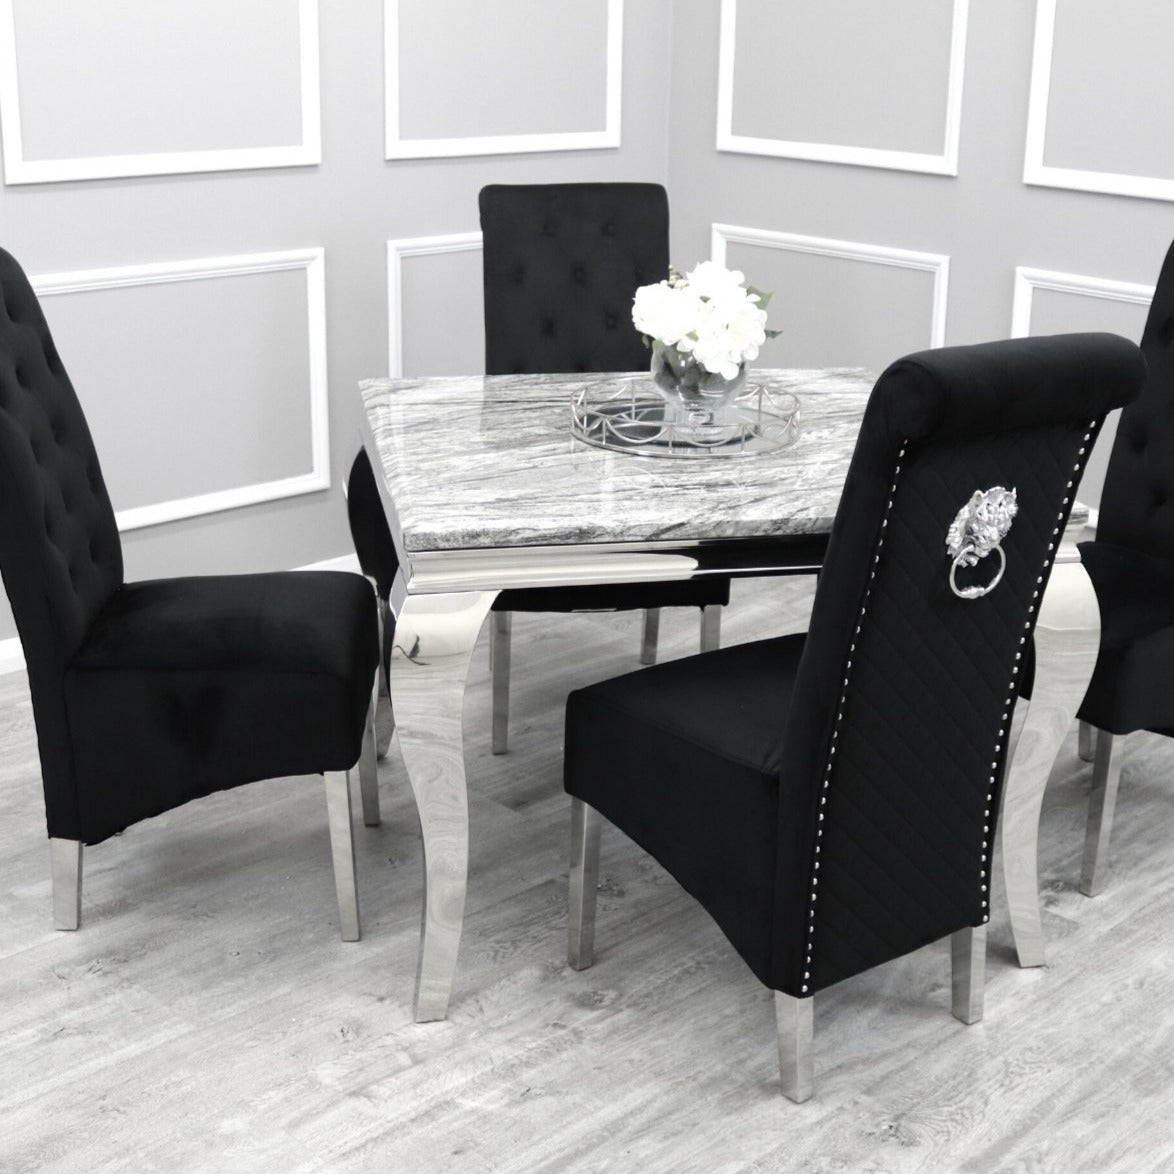 Louis Square Dining Table & 4 Black Chairs